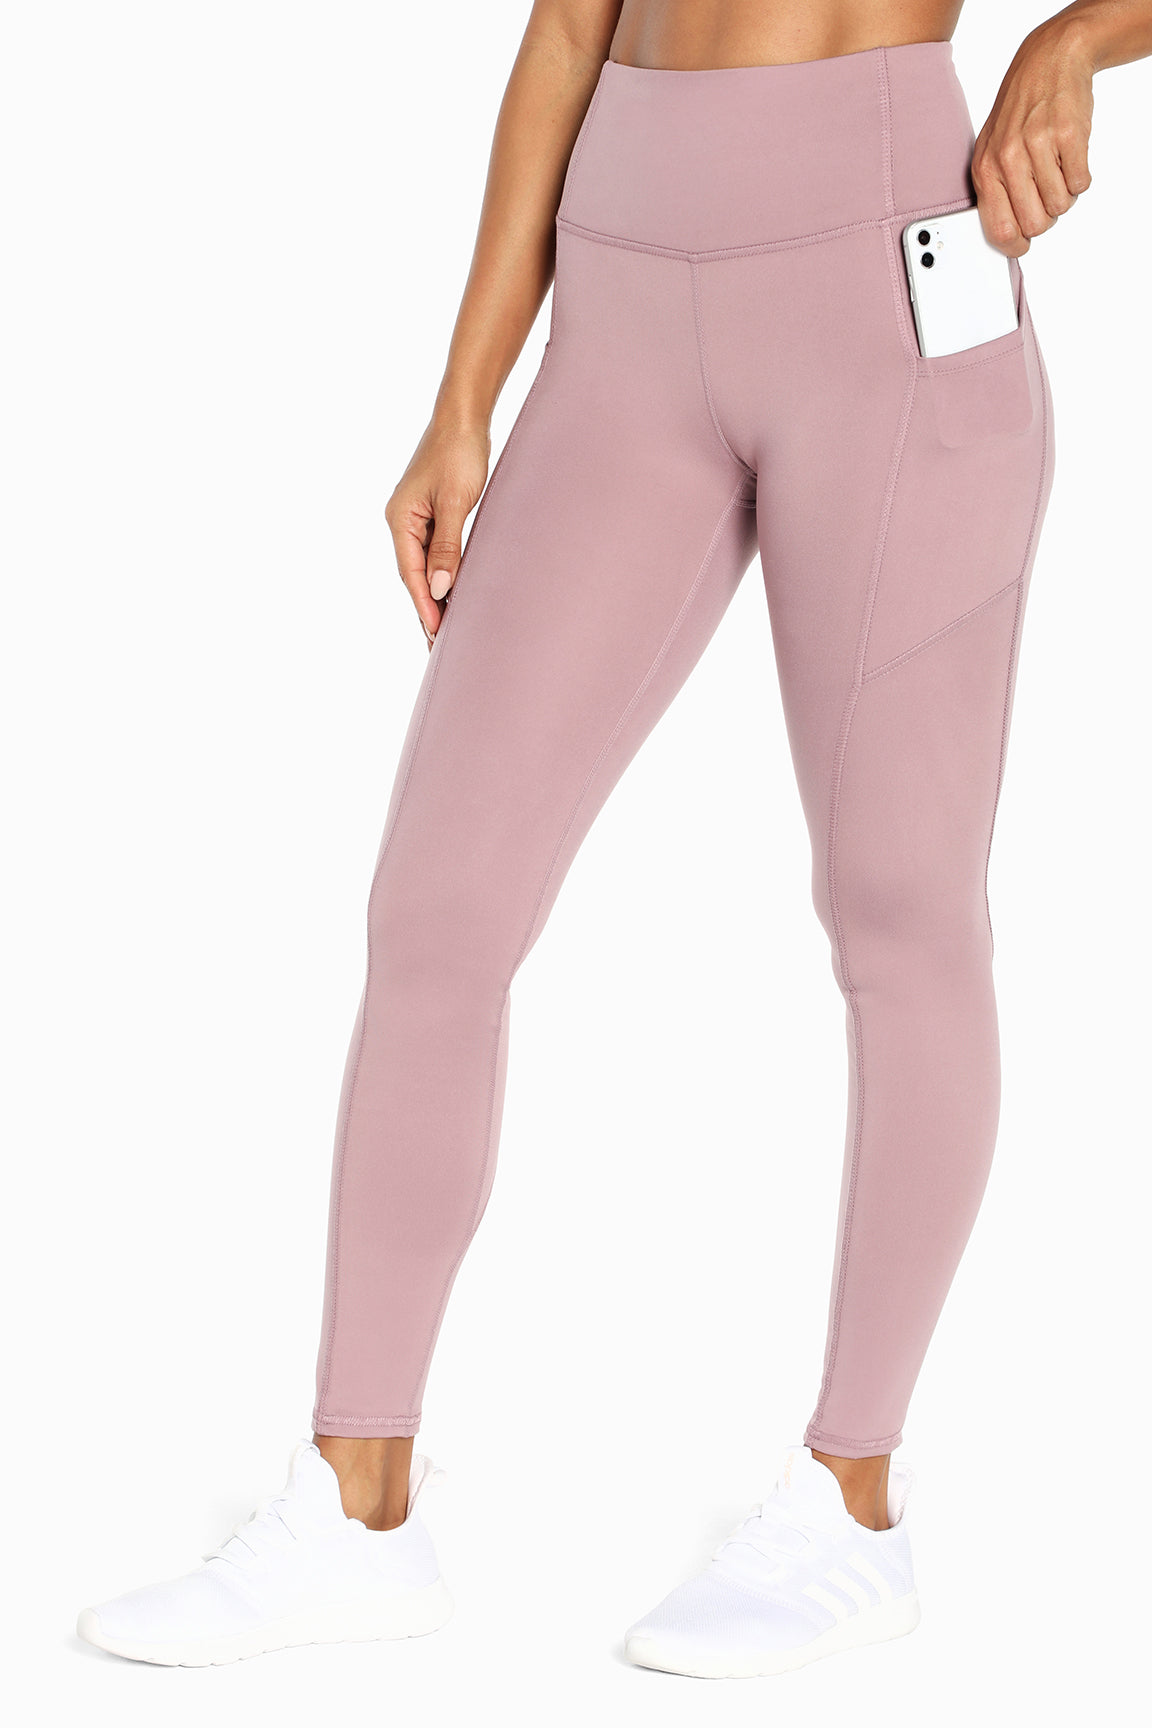 Women's Tights - Price (Low - High) – tagged size-xl-s – Reebok